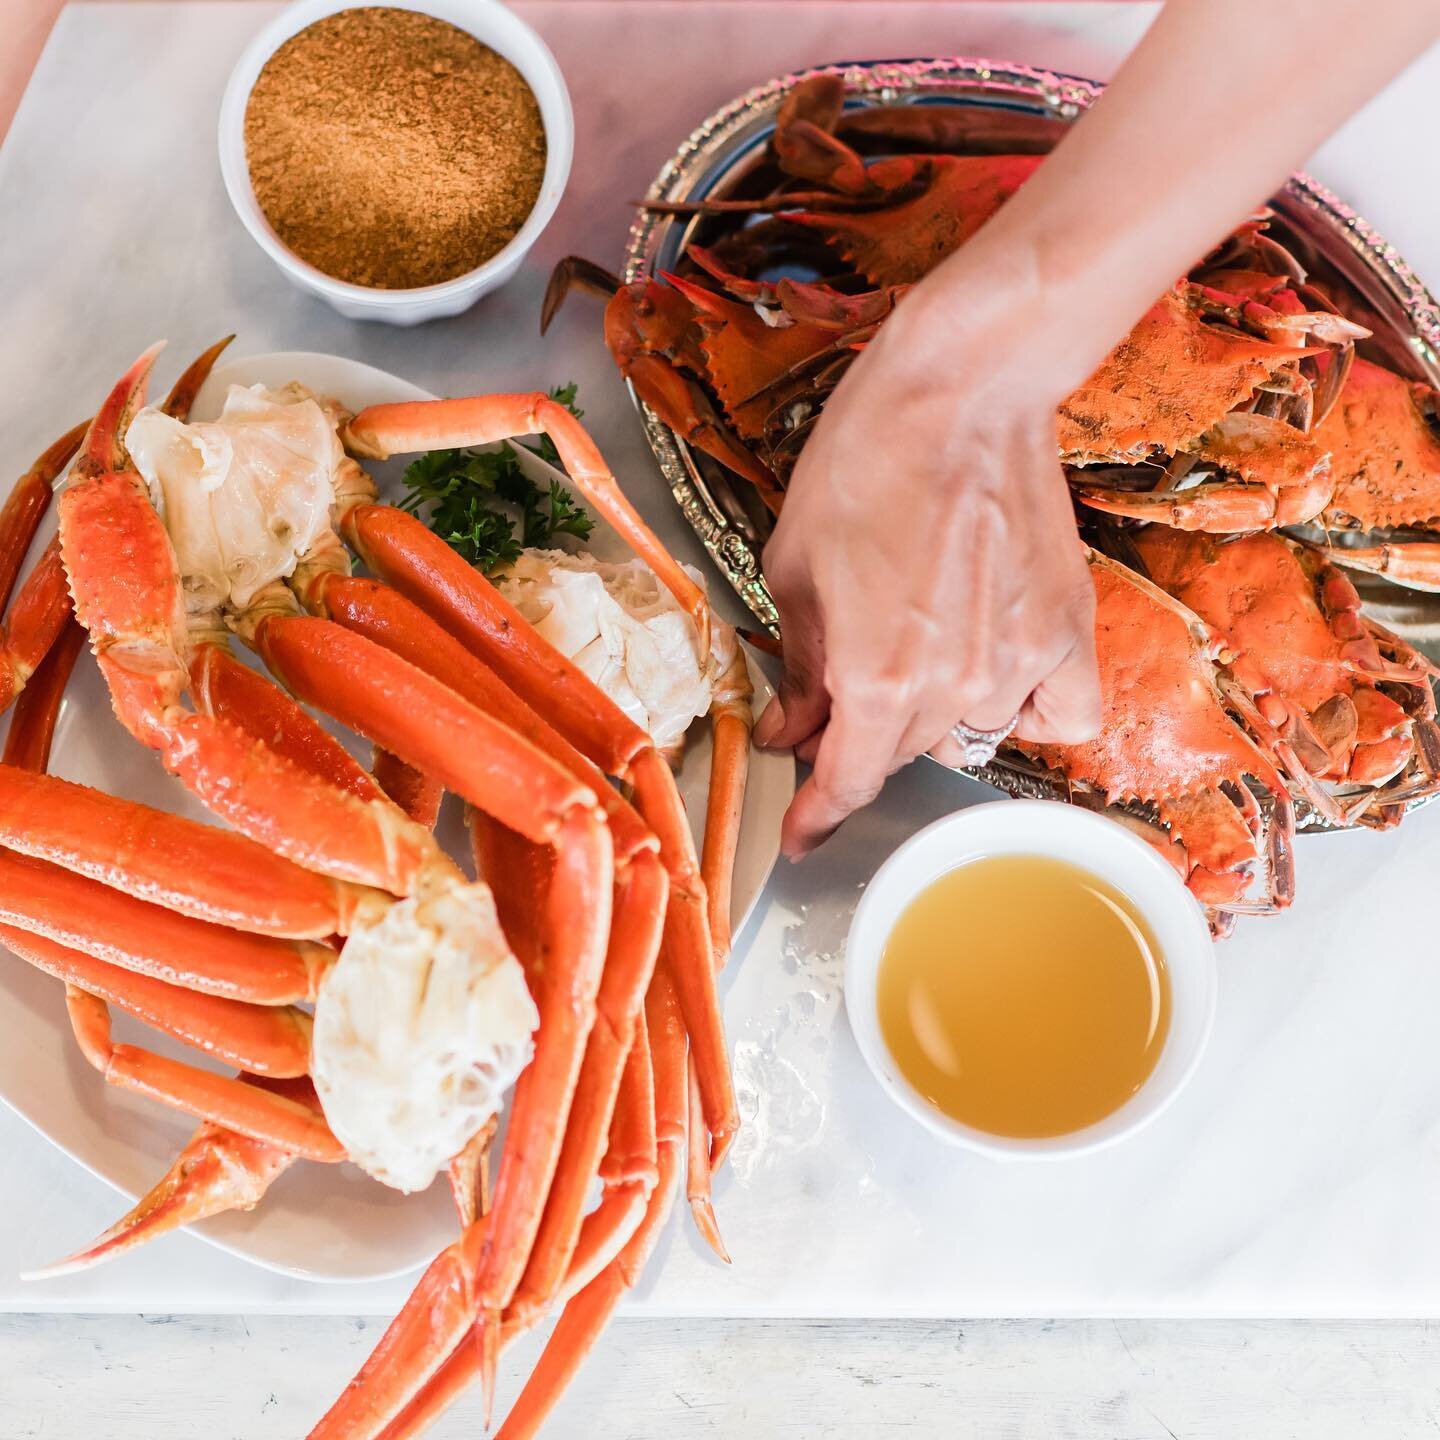 🦀 BLUE CRABS &amp; CRAB LEGS CAME EARLY THIS WEEK! 🦀

Give our fresh market a call to order ahead 📲‼️ 3️⃣3️⃣6️⃣-7️⃣4️⃣8️⃣-0️⃣7️⃣9️⃣3️⃣ EXT. 2️⃣
 
Order online by clicking the link in our profile ⬆️📲

📸: @jodiebrim